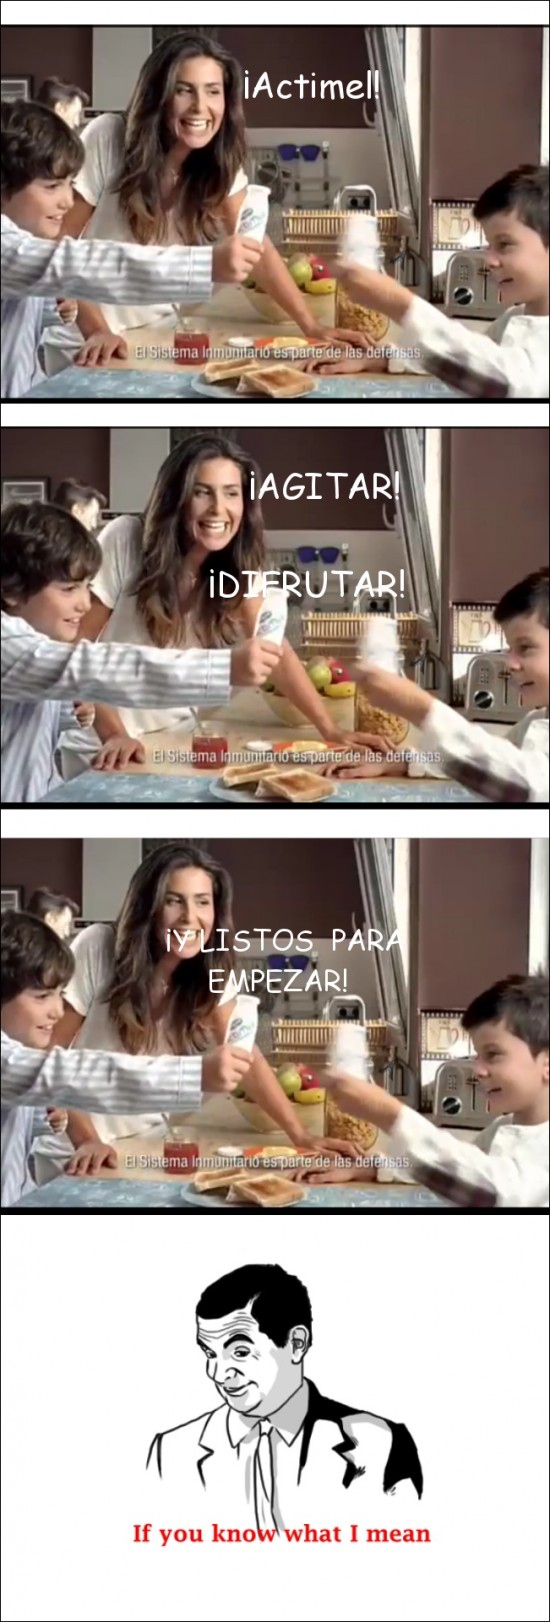 actimel,disfrutar,if you know what i mean,nuria roca